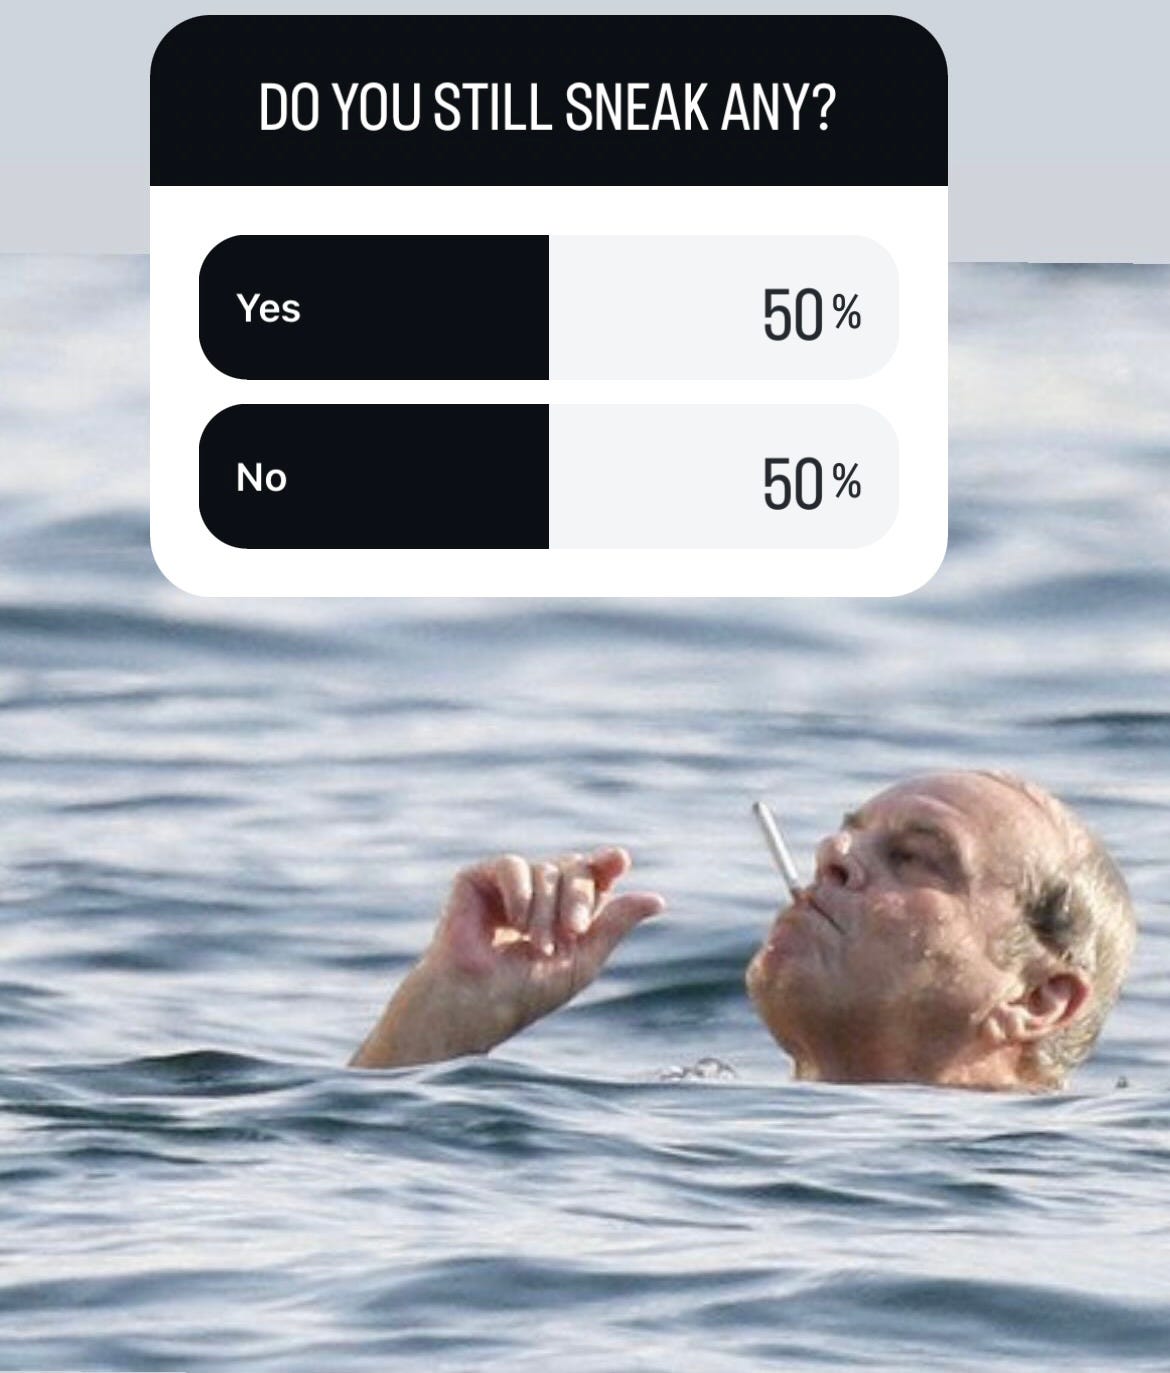 Instagram poll, "Do you still sneak any?" Yes / No with an image of Jack Nicolson smoking almost fully submerged in a body of water.